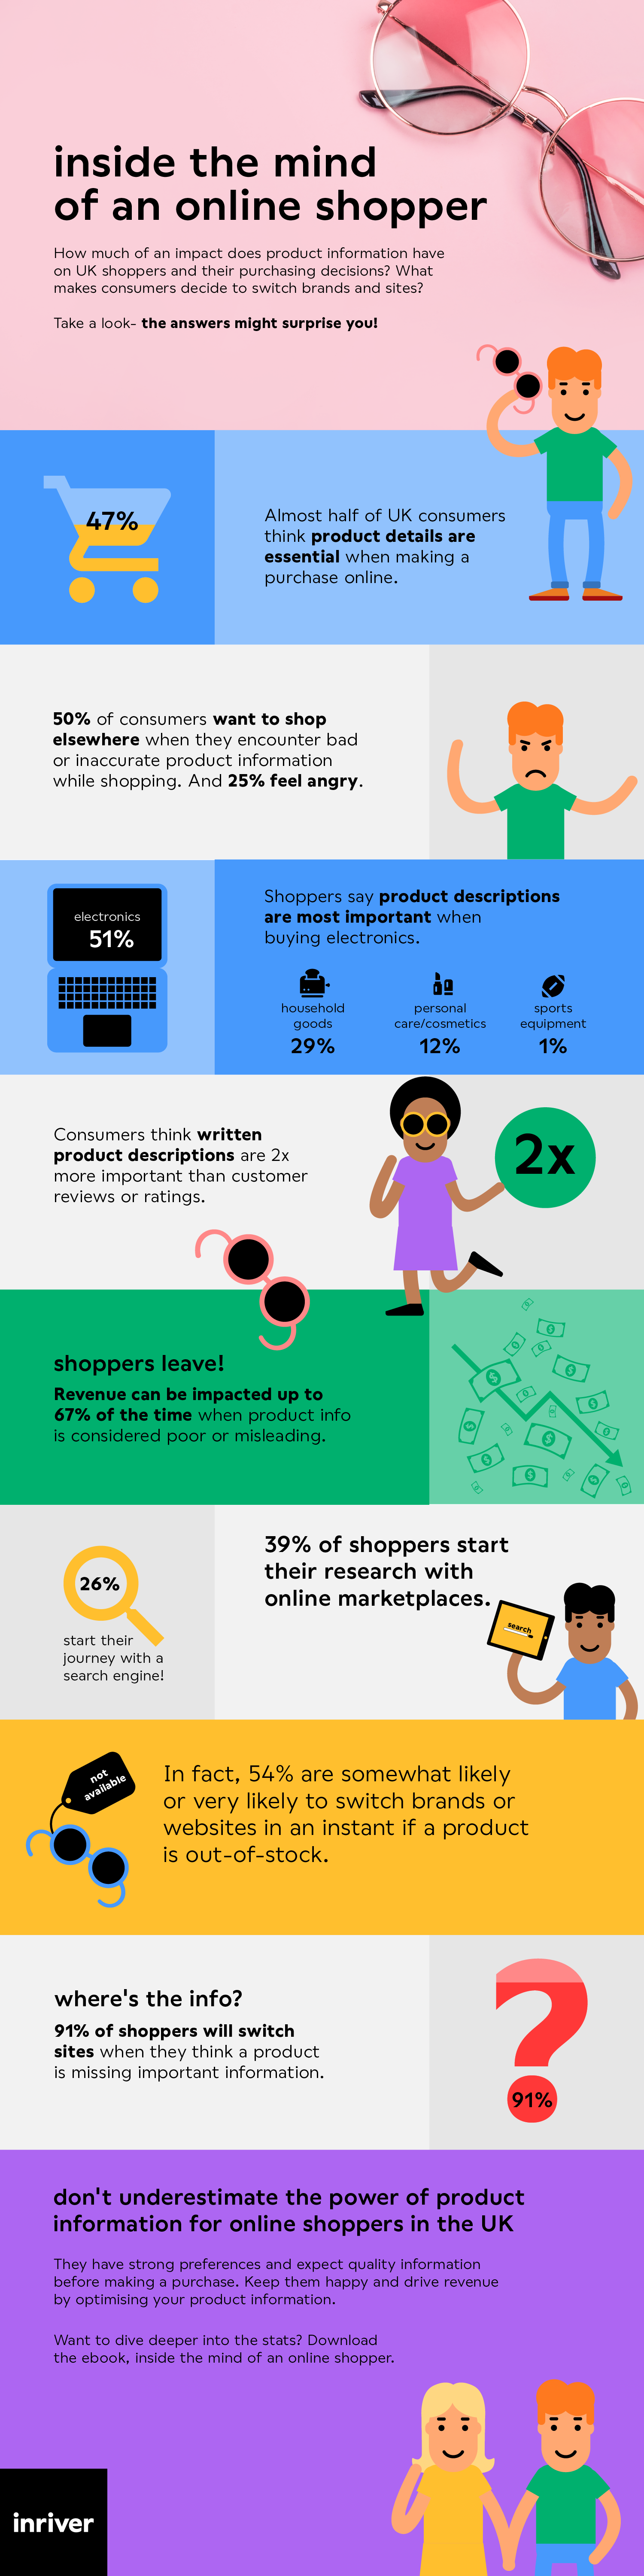 Inside the mind of an online shopper infographic (UK)